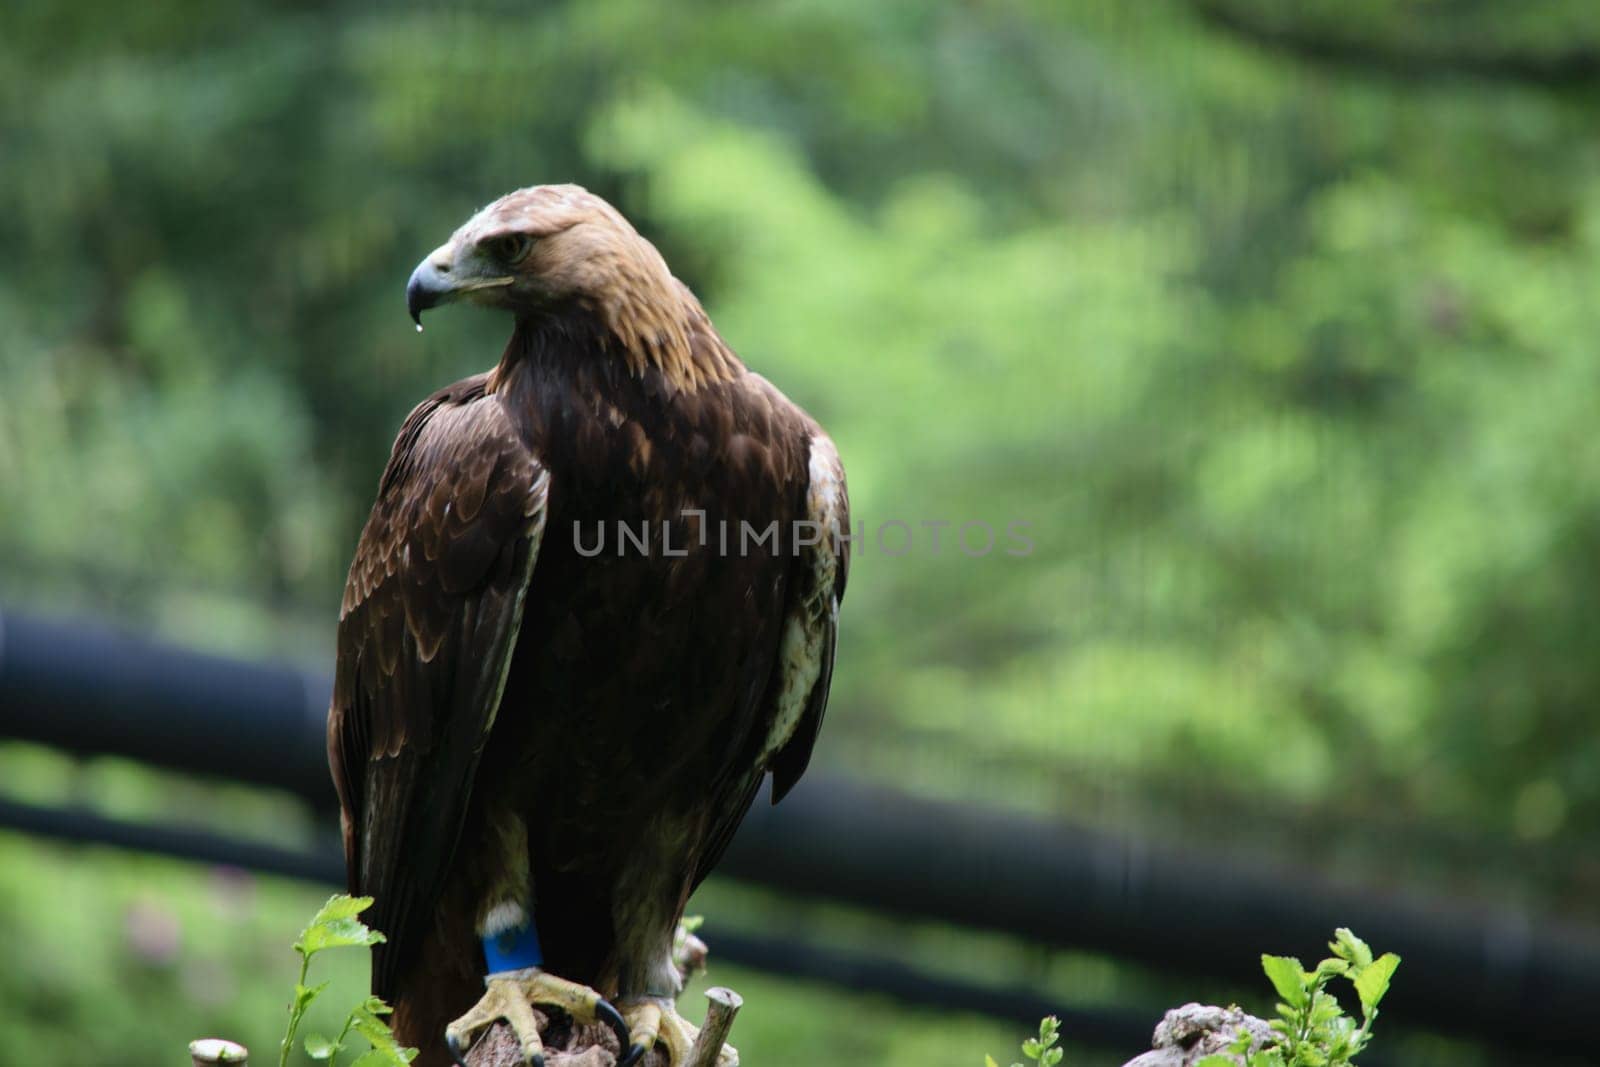 Majestic brown eagle perched, with a sharp gaze, against a blurred green forest background.